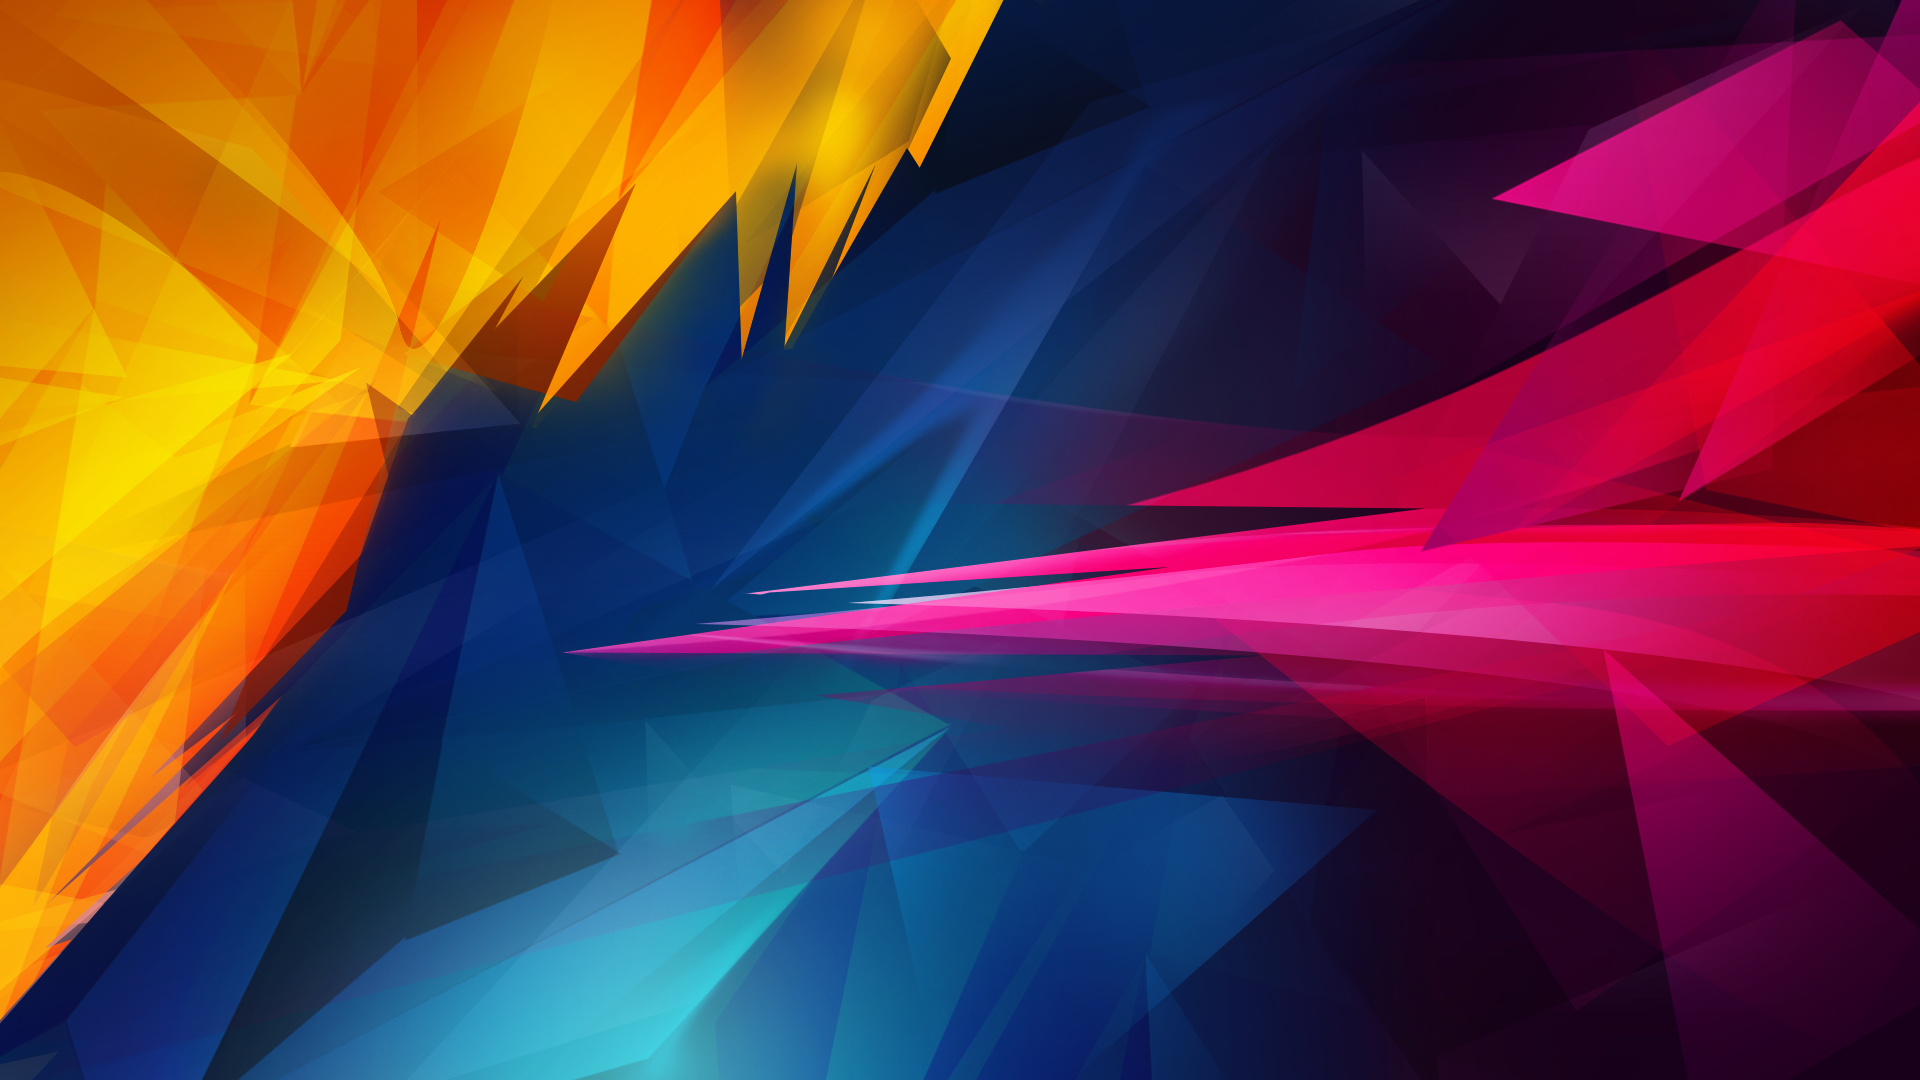 Wallpaper 3D Colorful abstract illustration 